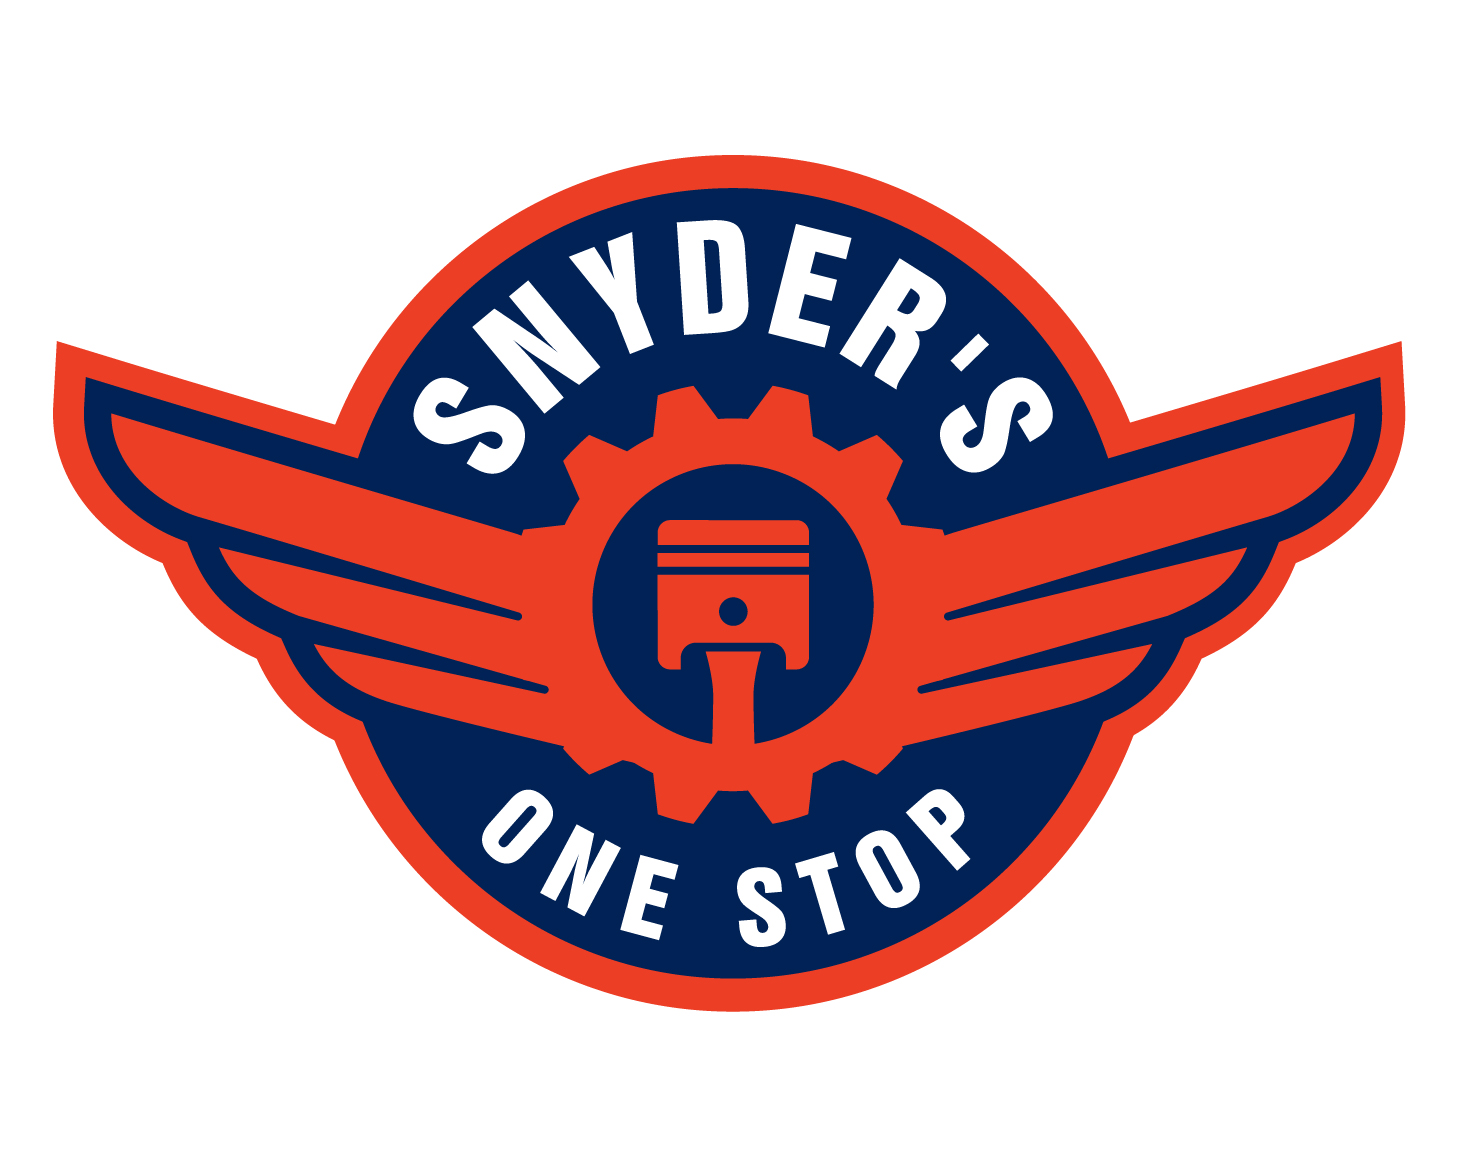 Snyder's One Stop 5351 PA-61, Paxinos Pennsylvania 17860